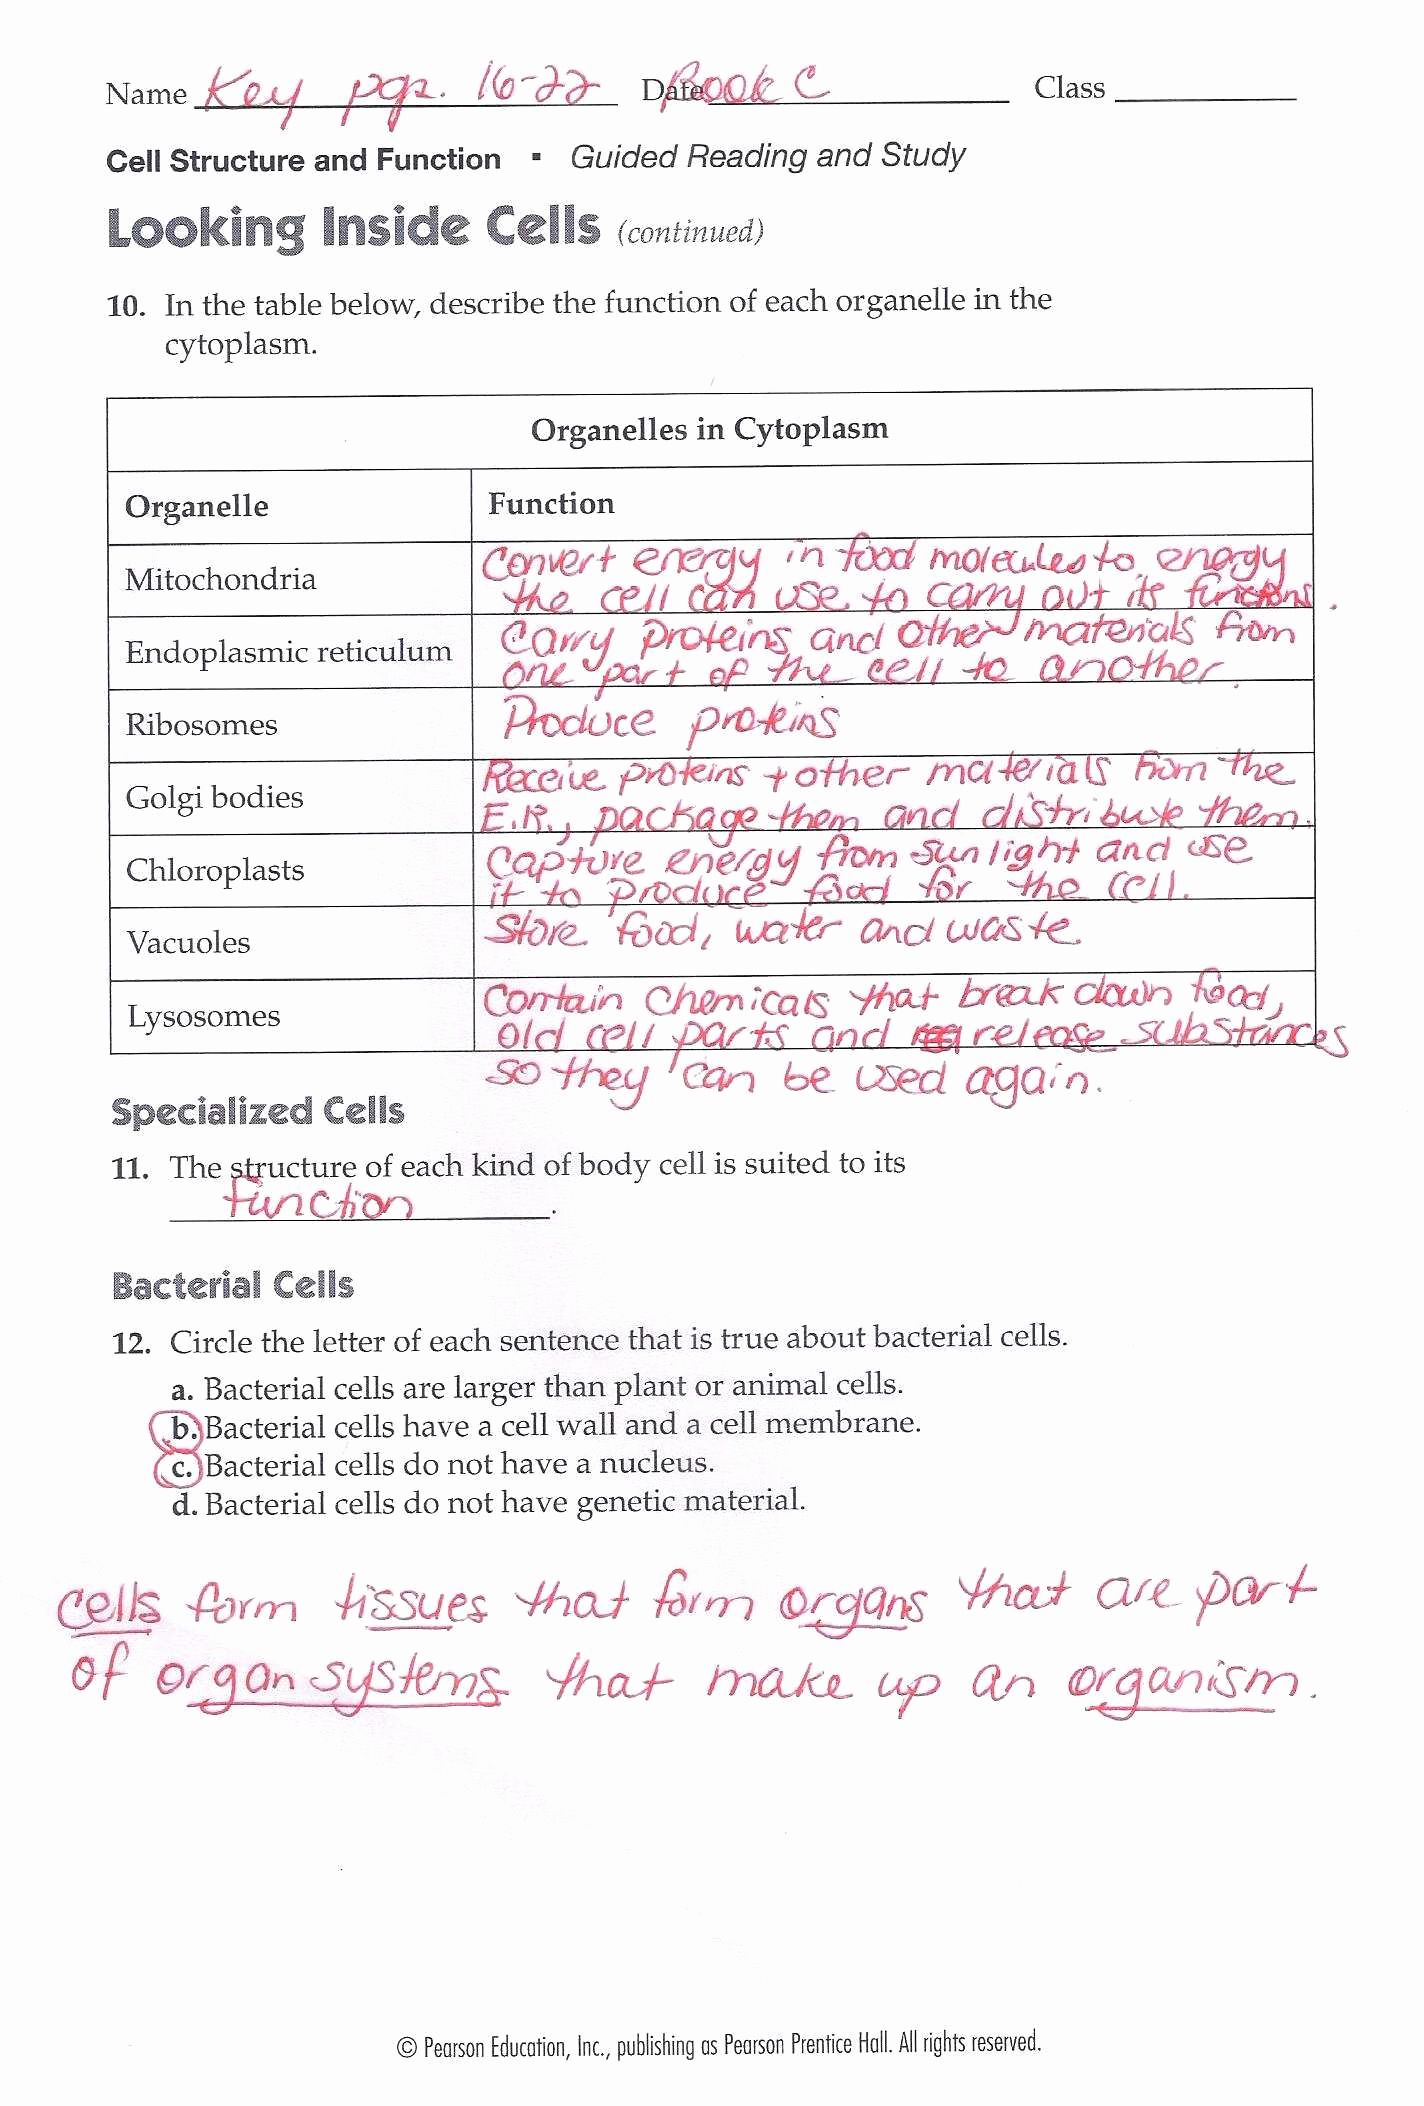 Cell Membrane Structure and Function Worksheet Answers Inspirational Cell Transport Review Worksheet Up Ing Cell Membrane